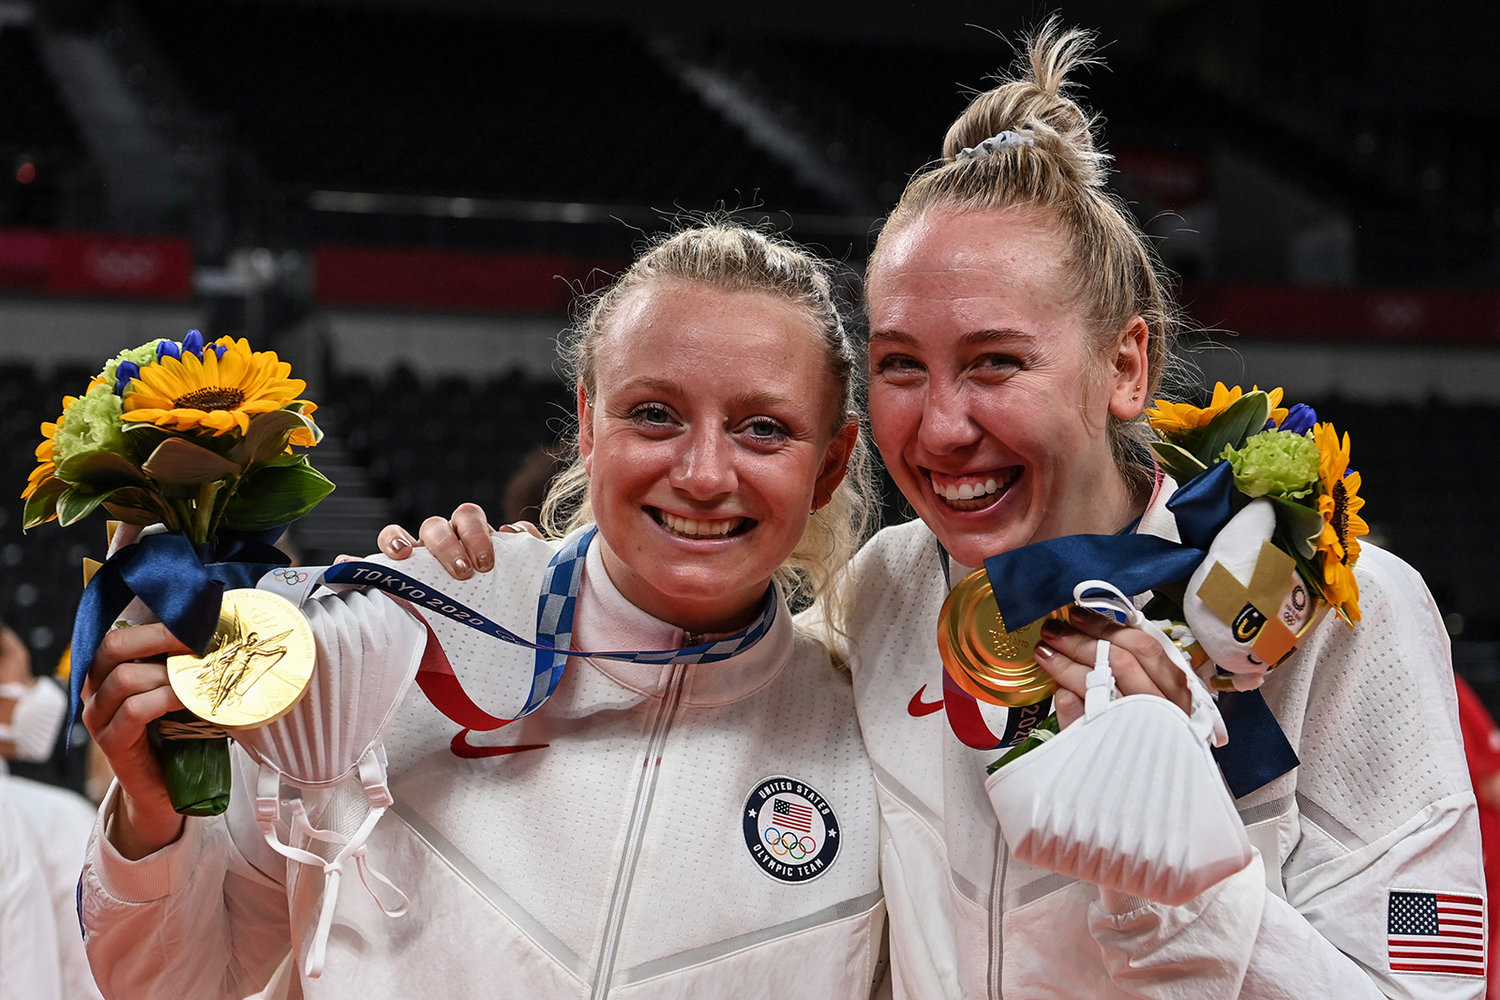 From left to right: USA's Jordyn Poulter and Michelle Bartsch-Hackley pose with their gold medals during the women's volleyball victory ceremony during the Tokyo 2020 Olympic Games at Ariake Arena in Tokyo on Aug. 8, 2021. (Yuri Cortez/AFP via Getty Images/TNS)